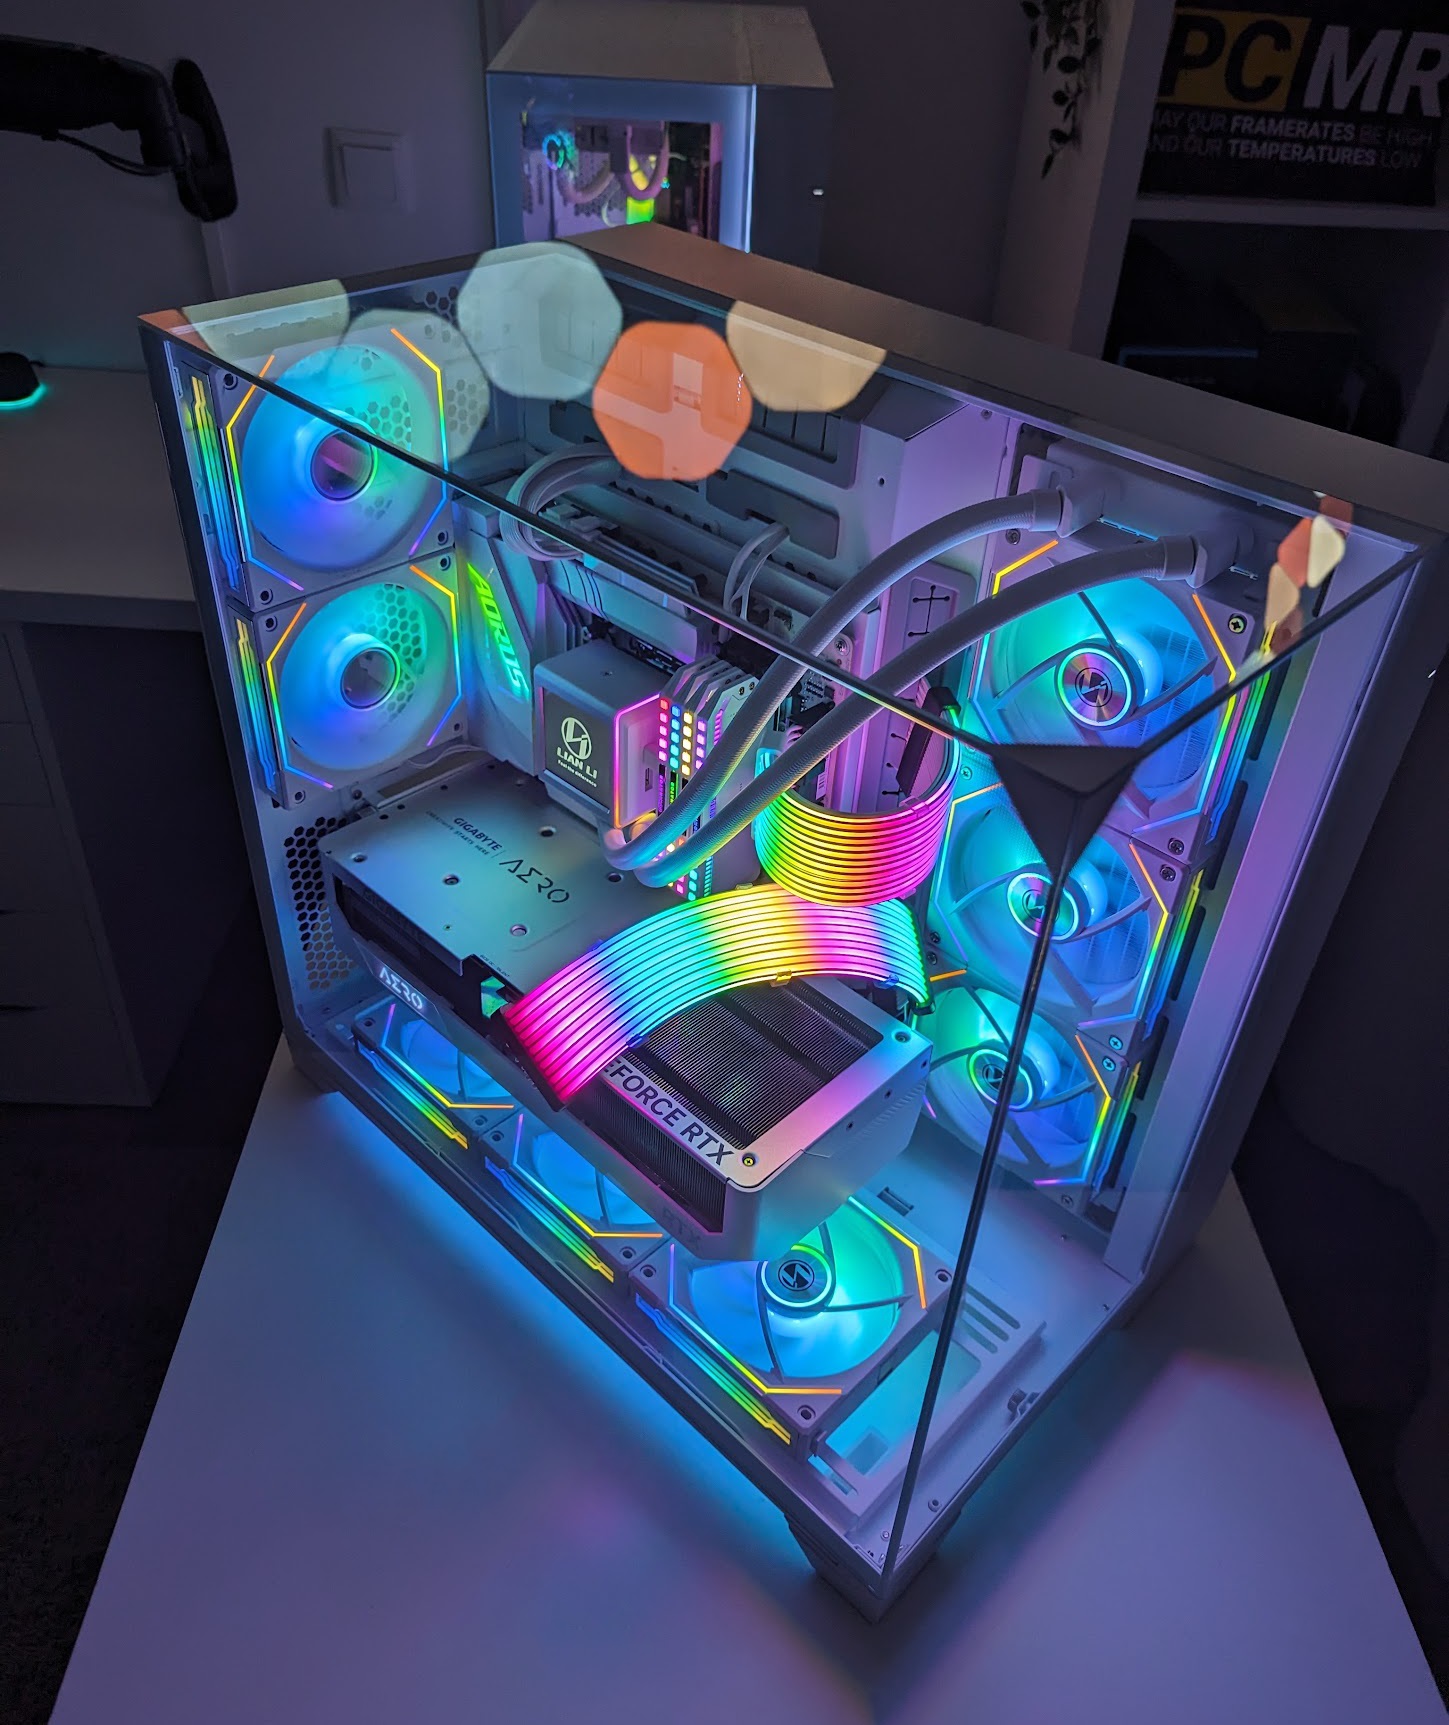 Lian Li And PCMR Collab On A PC Case To Showcase Your Building